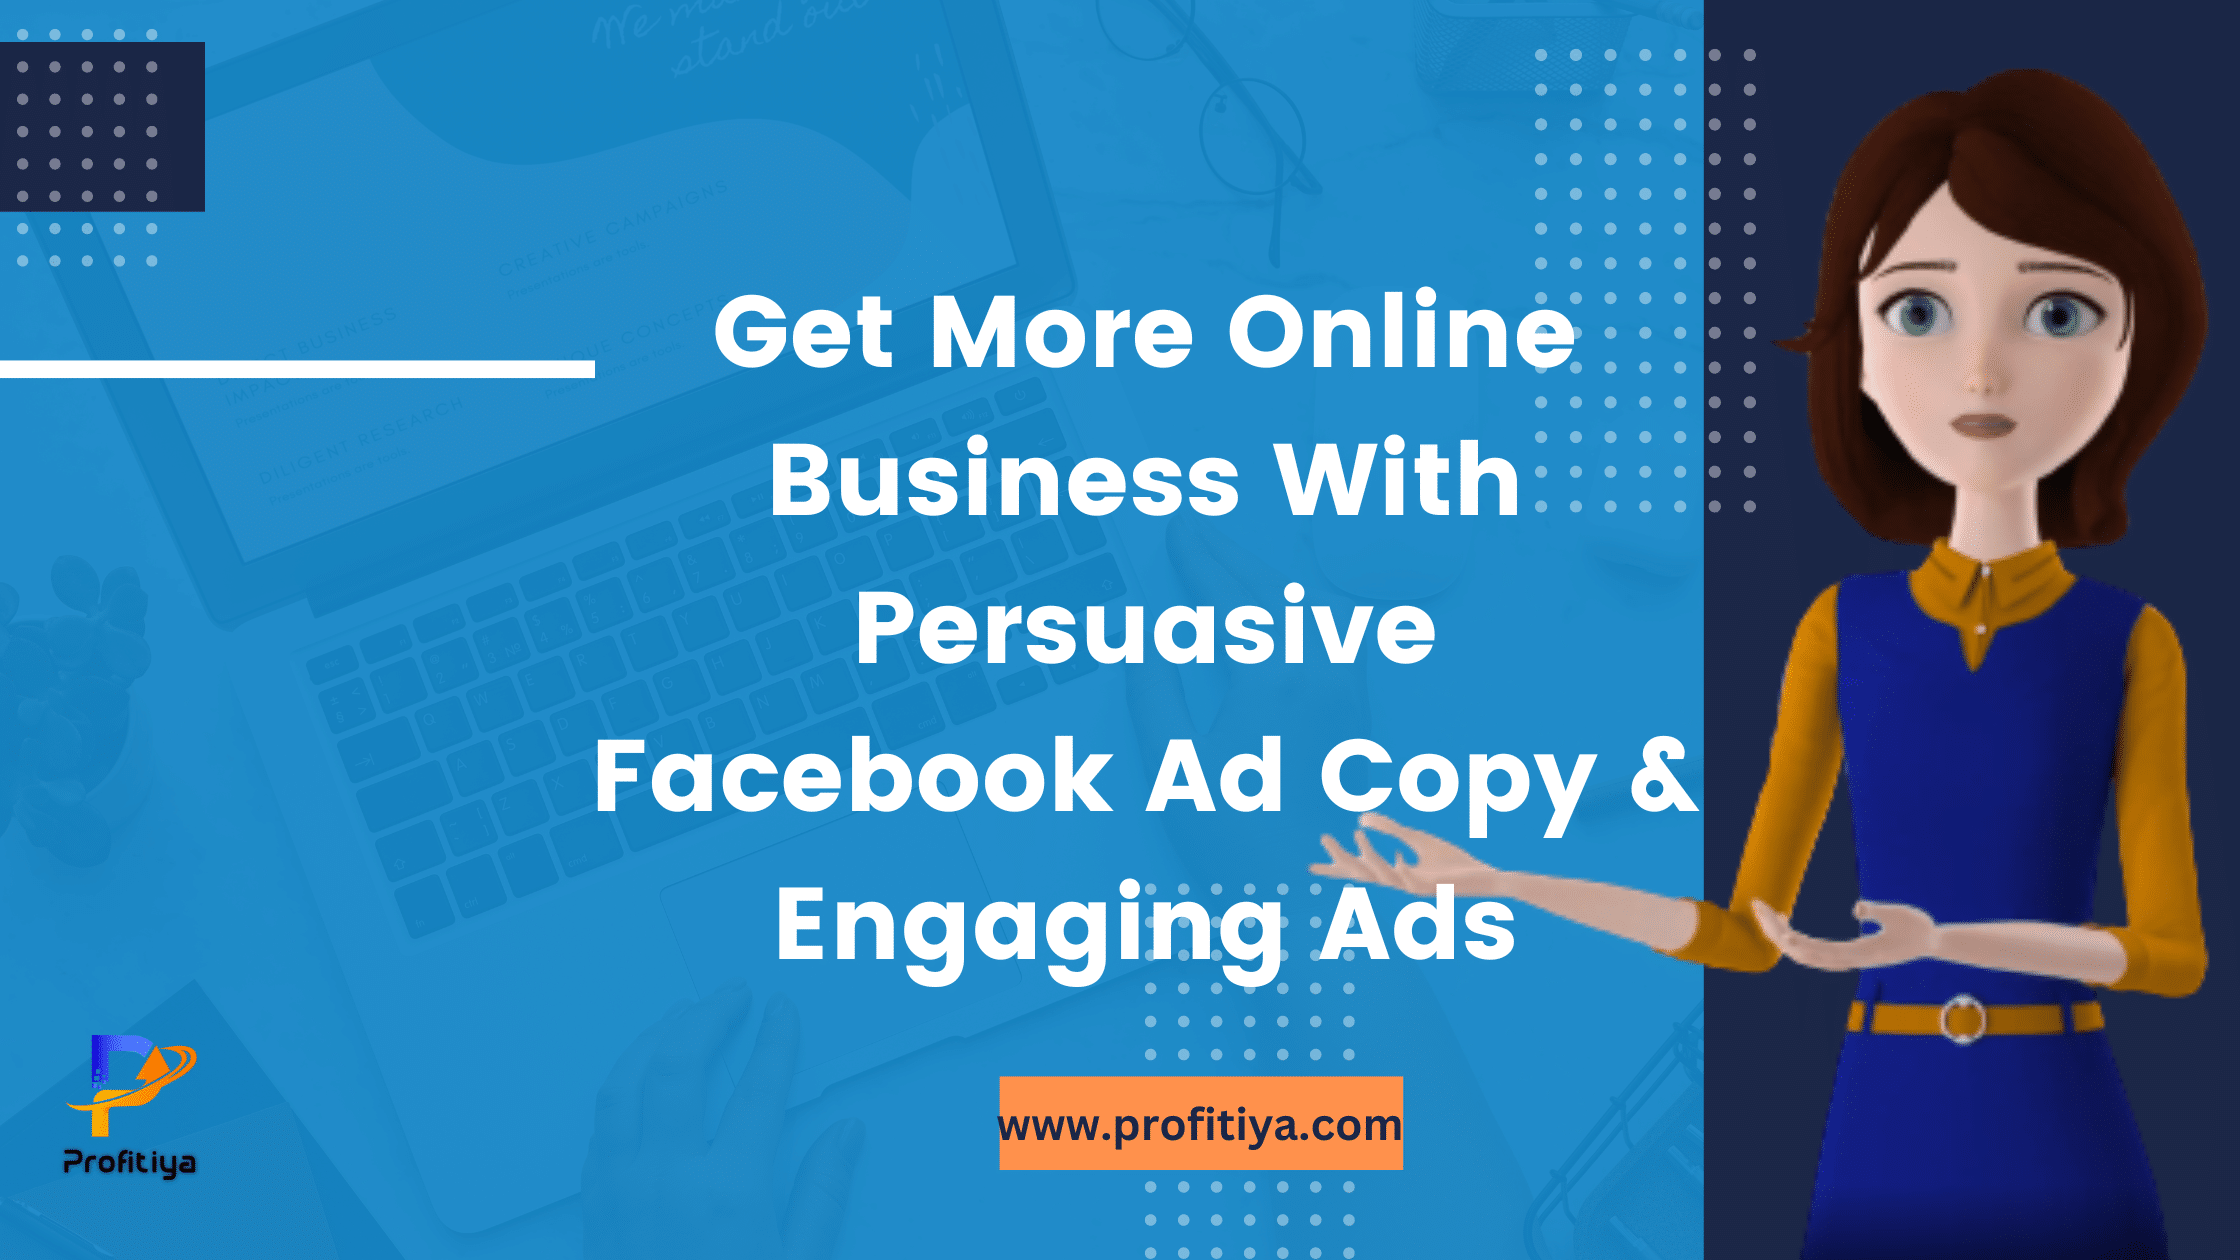 Get More Online Business With Persuasive Facebook Ad Copy And Engaging Ads